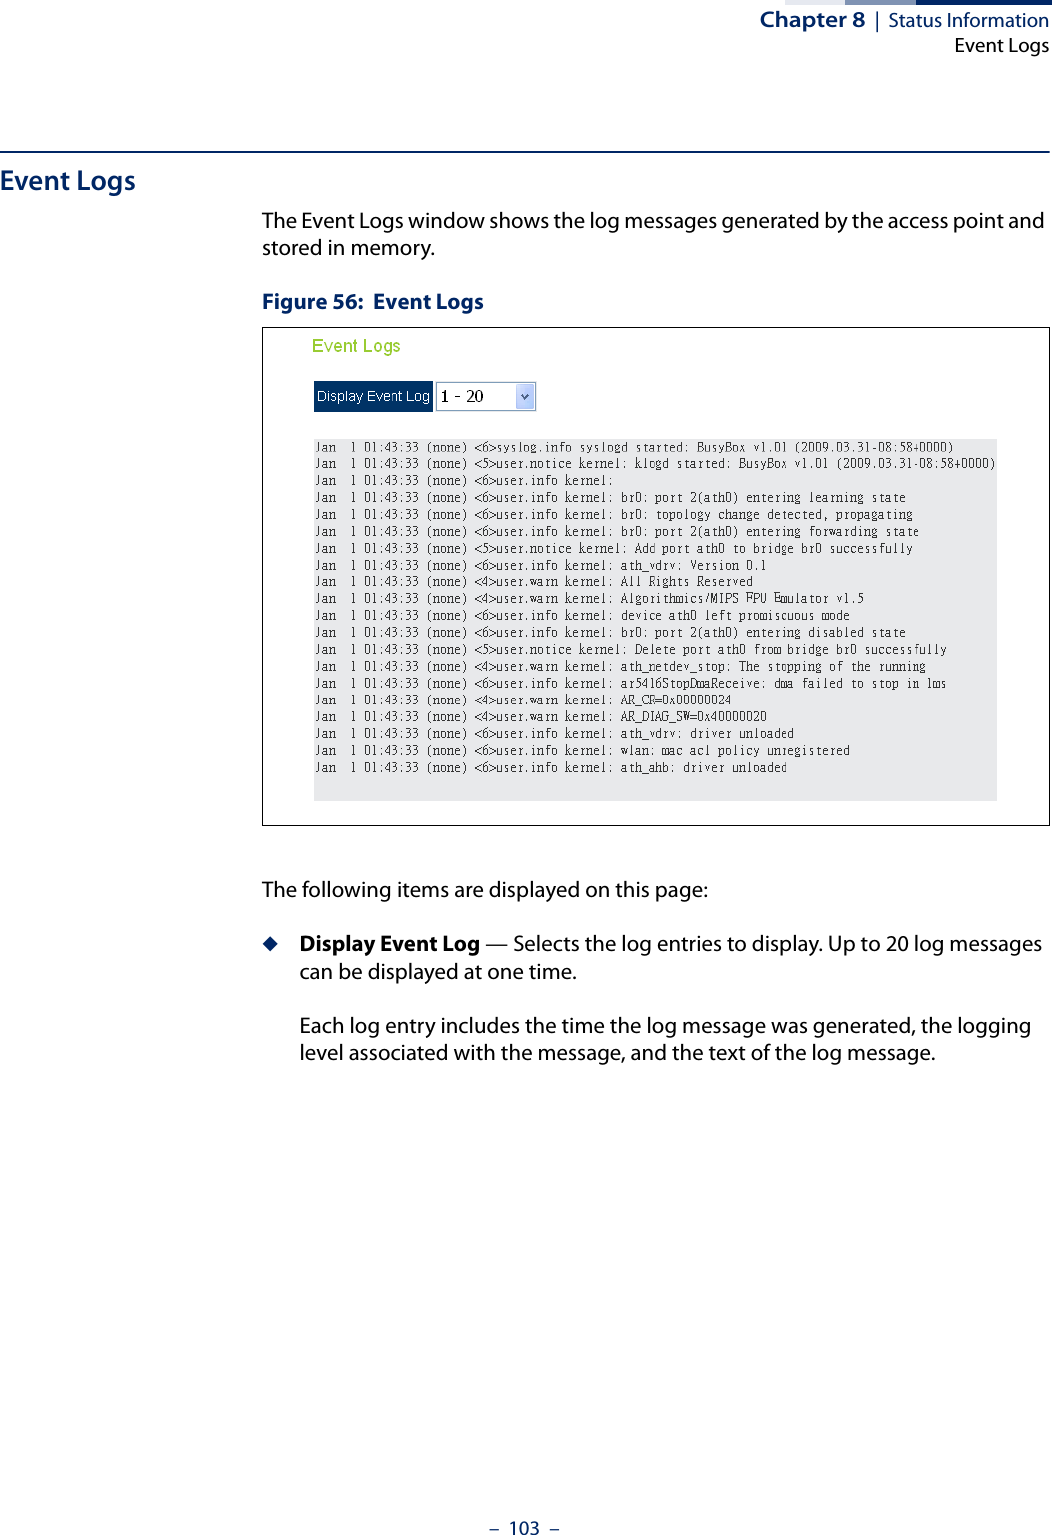 Chapter 8  |  Status InformationEvent Logs–  103  –Event LogsThe Event Logs window shows the log messages generated by the access point and stored in memory.Figure 56:  Event LogsThe following items are displayed on this page:◆Display Event Log — Selects the log entries to display. Up to 20 log messages can be displayed at one time.Each log entry includes the time the log message was generated, the logging level associated with the message, and the text of the log message.